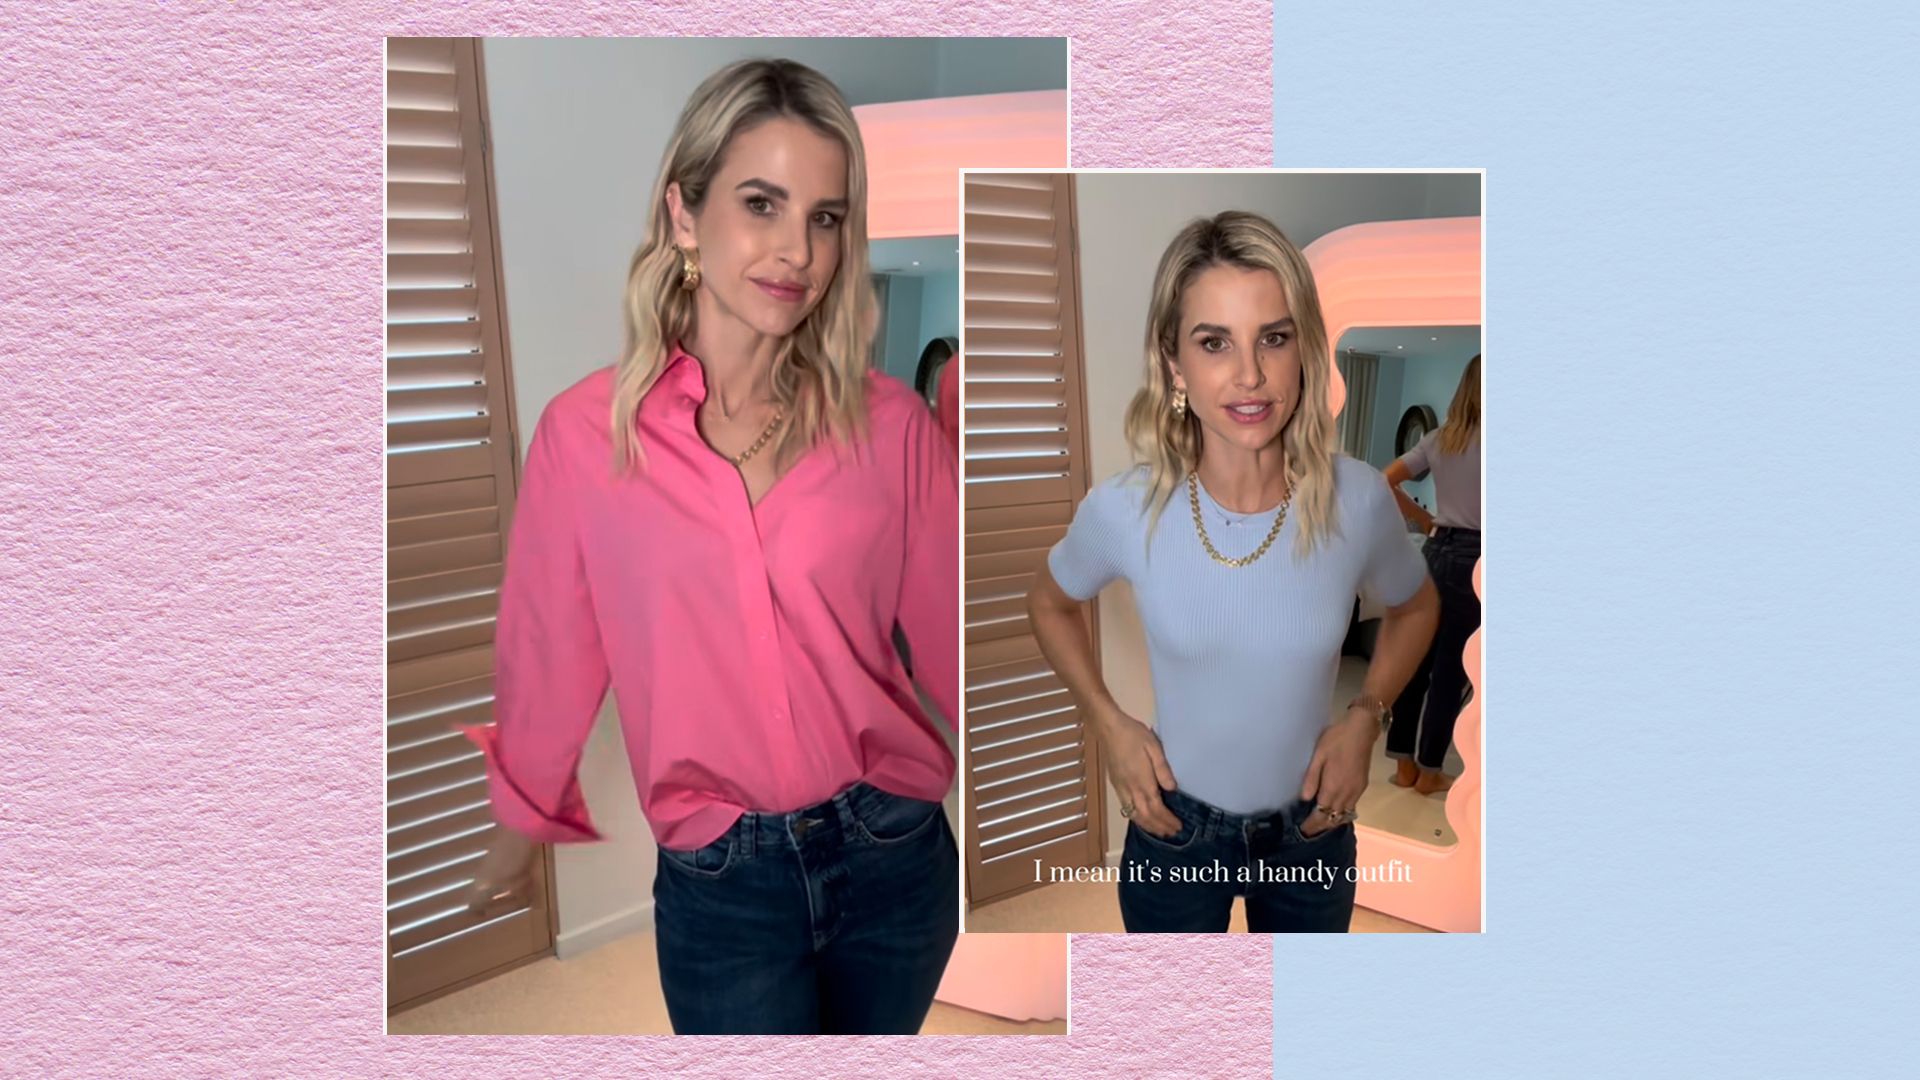 vogue williams in m and s jeans split image